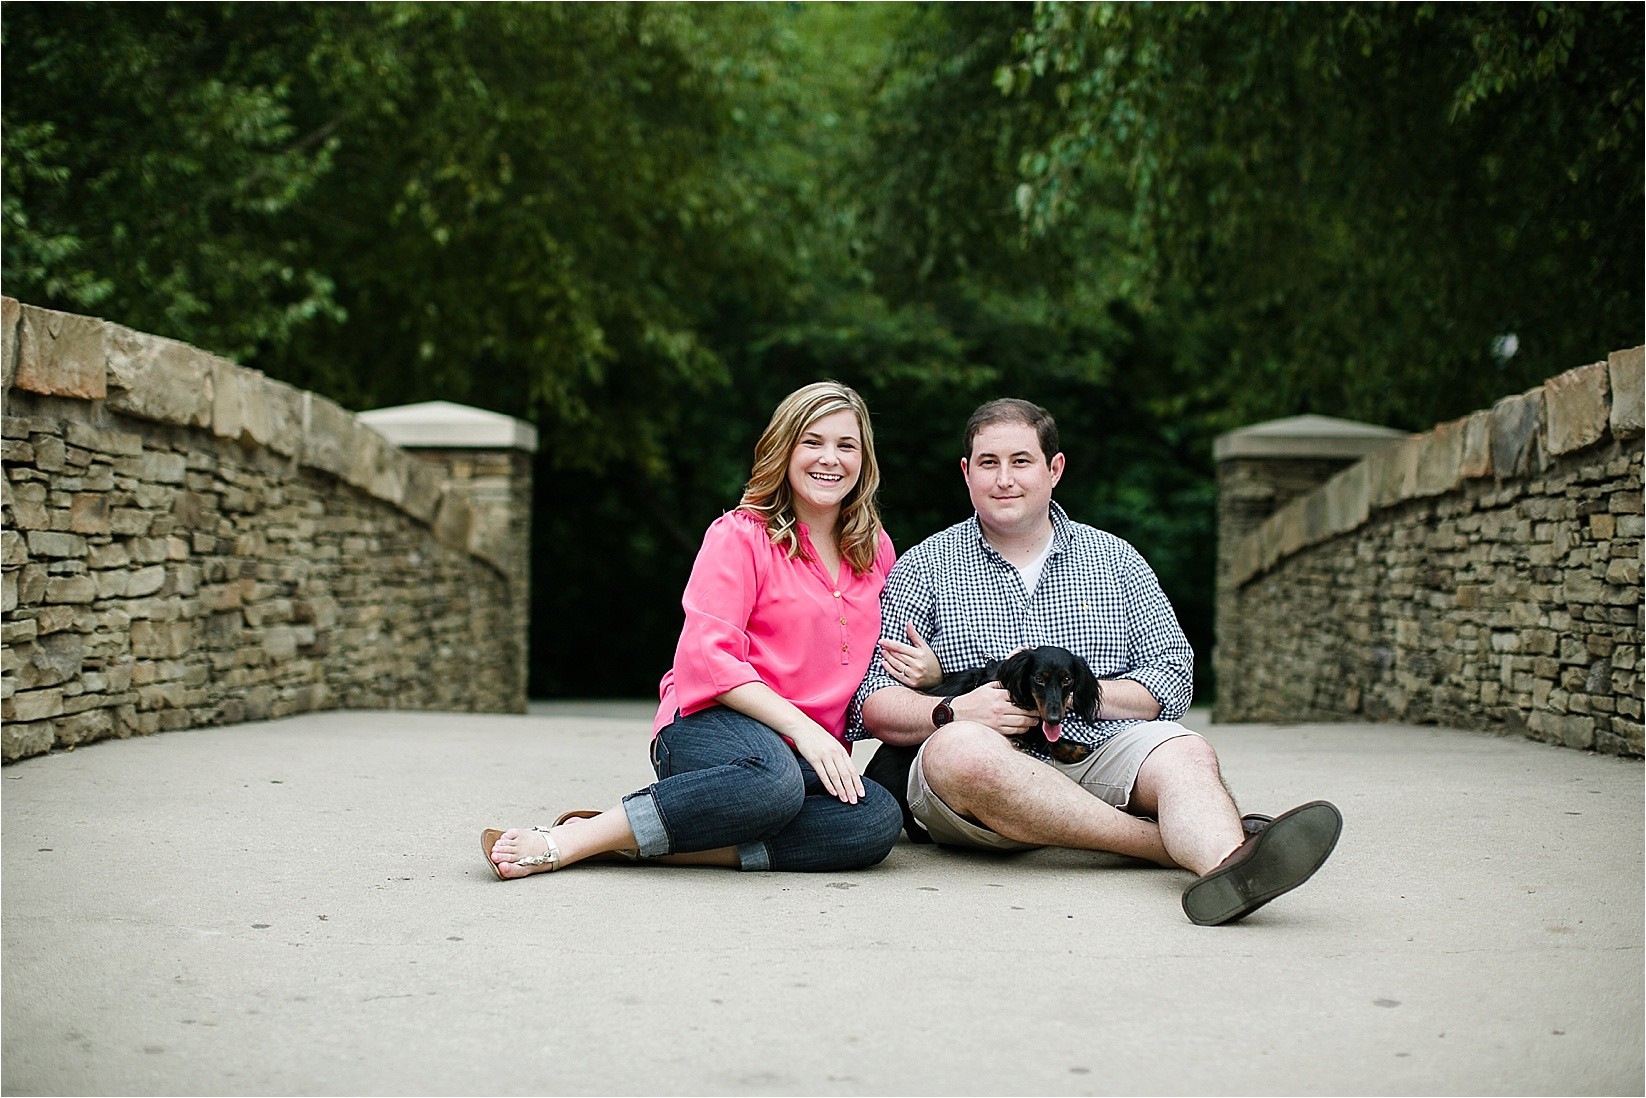 On the bridge at Catherine & Jordan's engagement session at freedom park and marshall park in Charlotte North Carolina